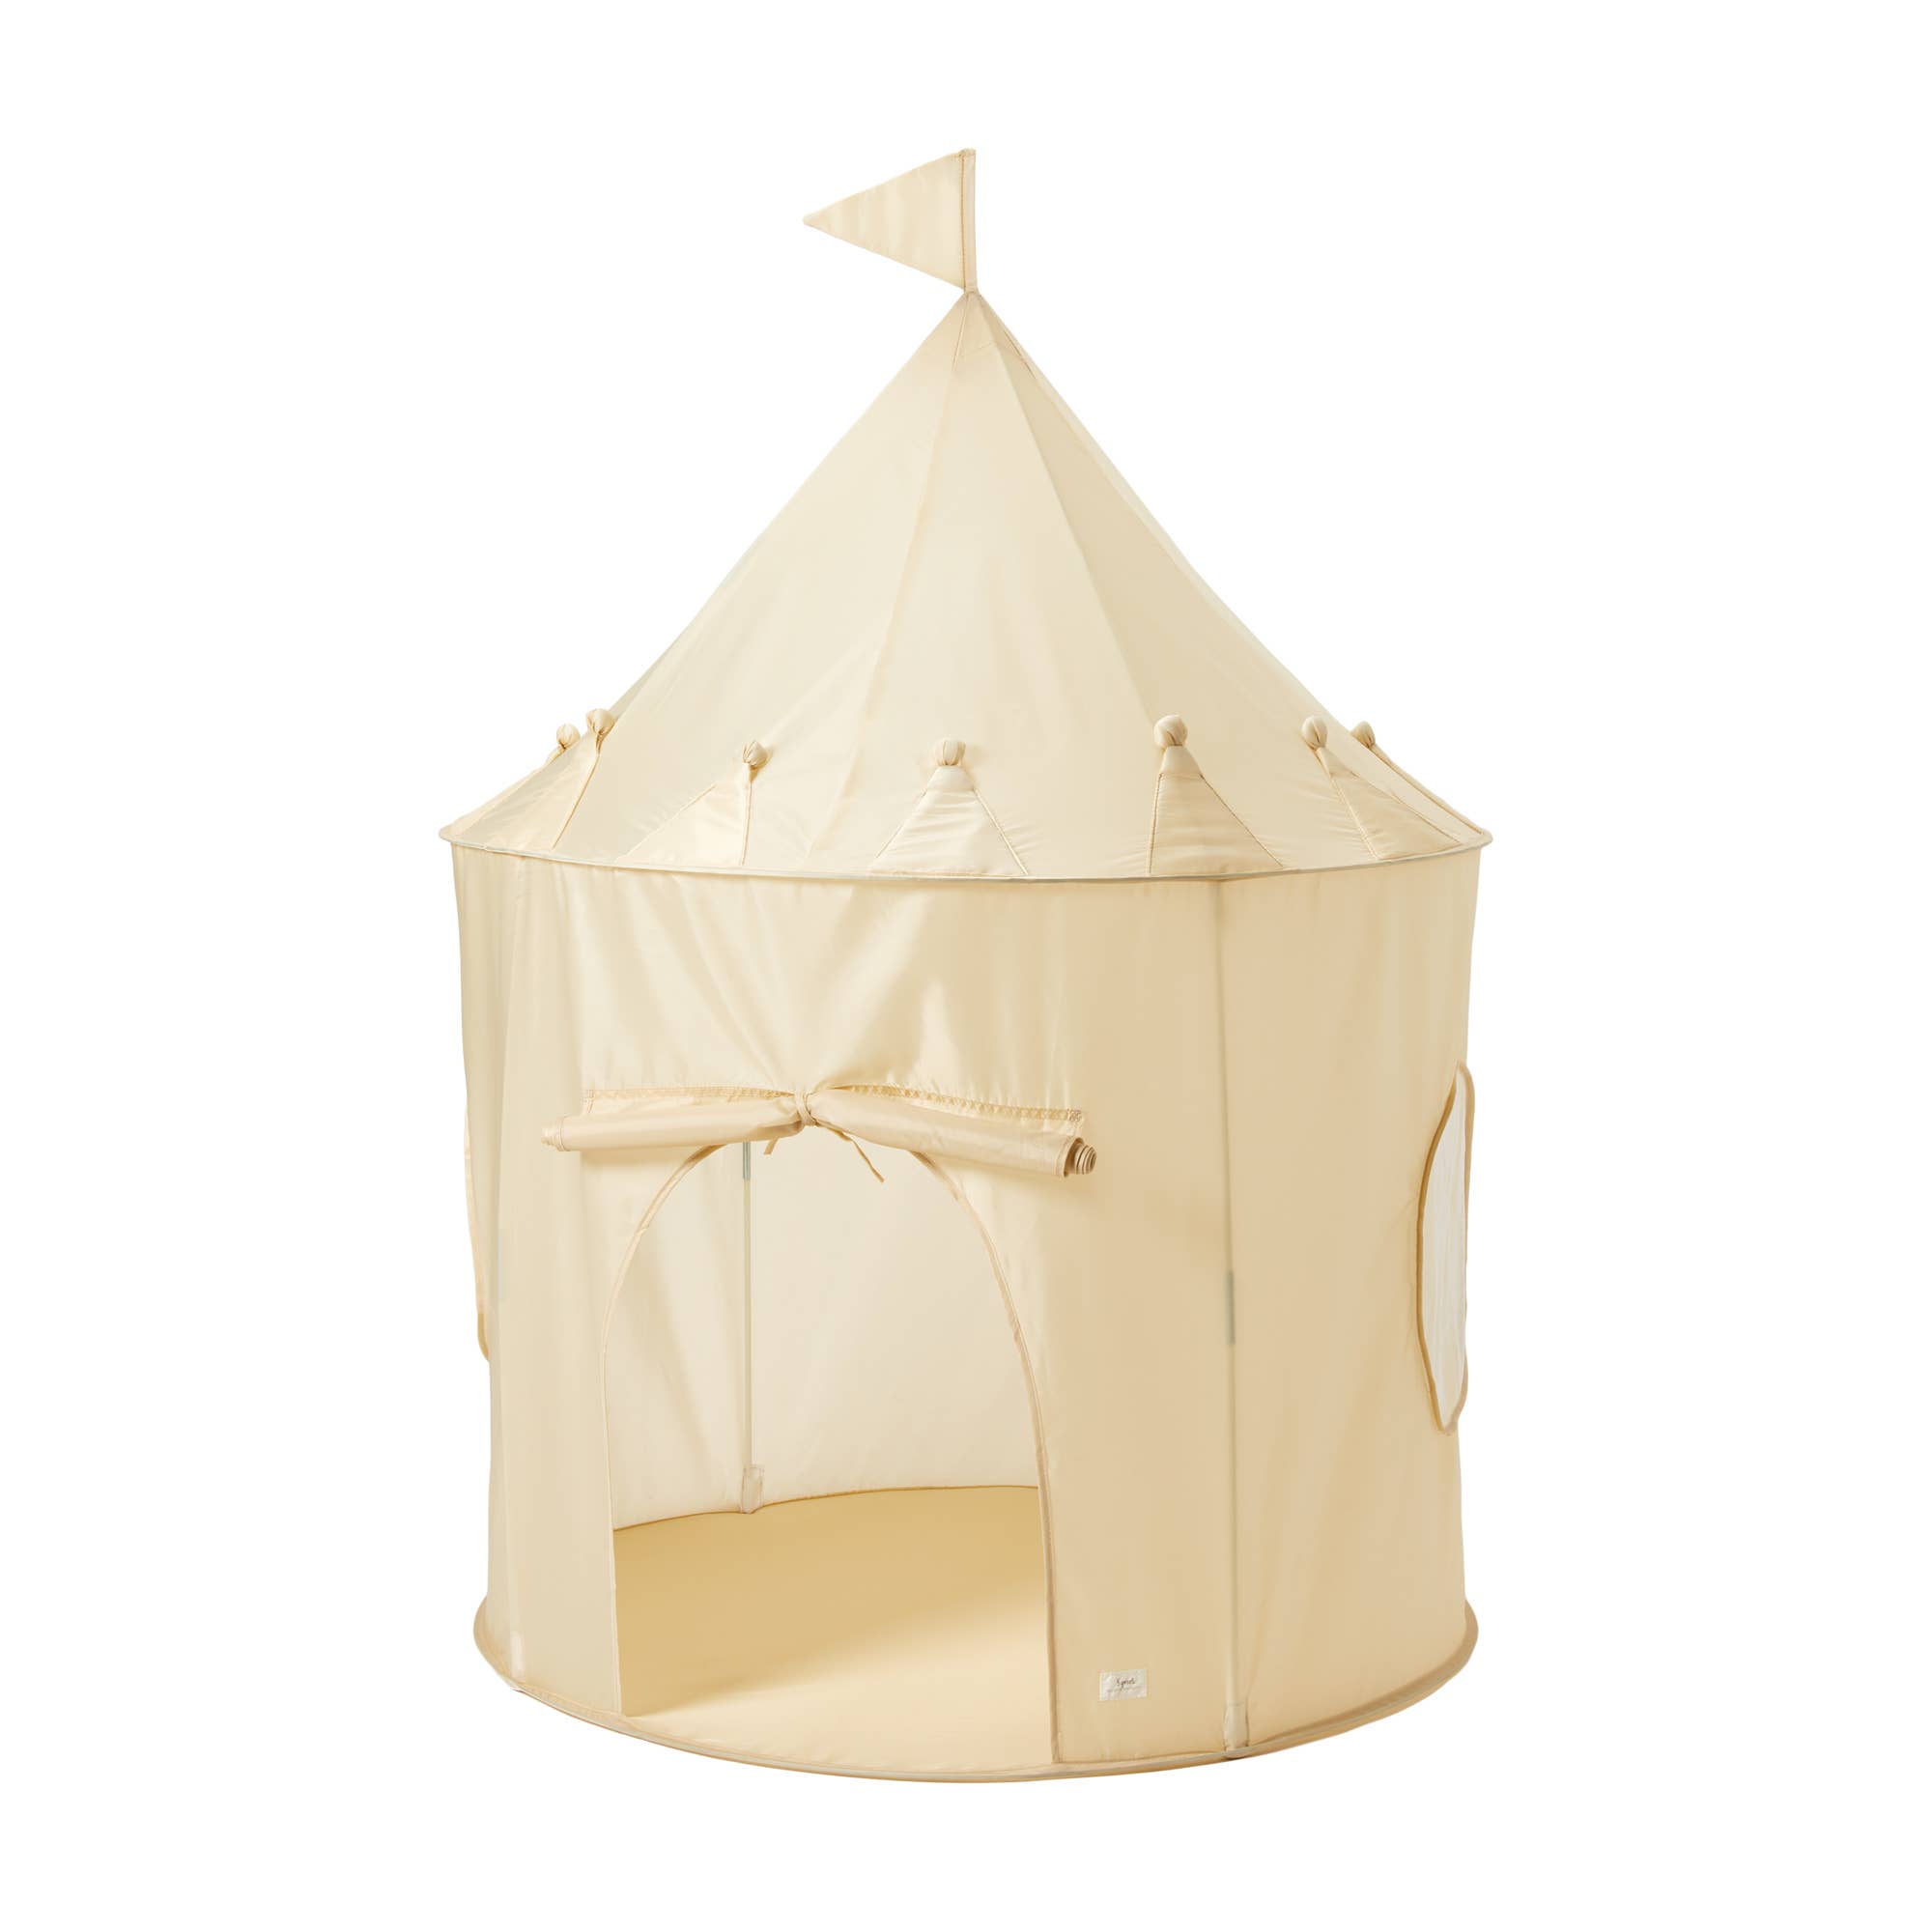 Recycled Fabric Play Tent Castle - Misty Pink